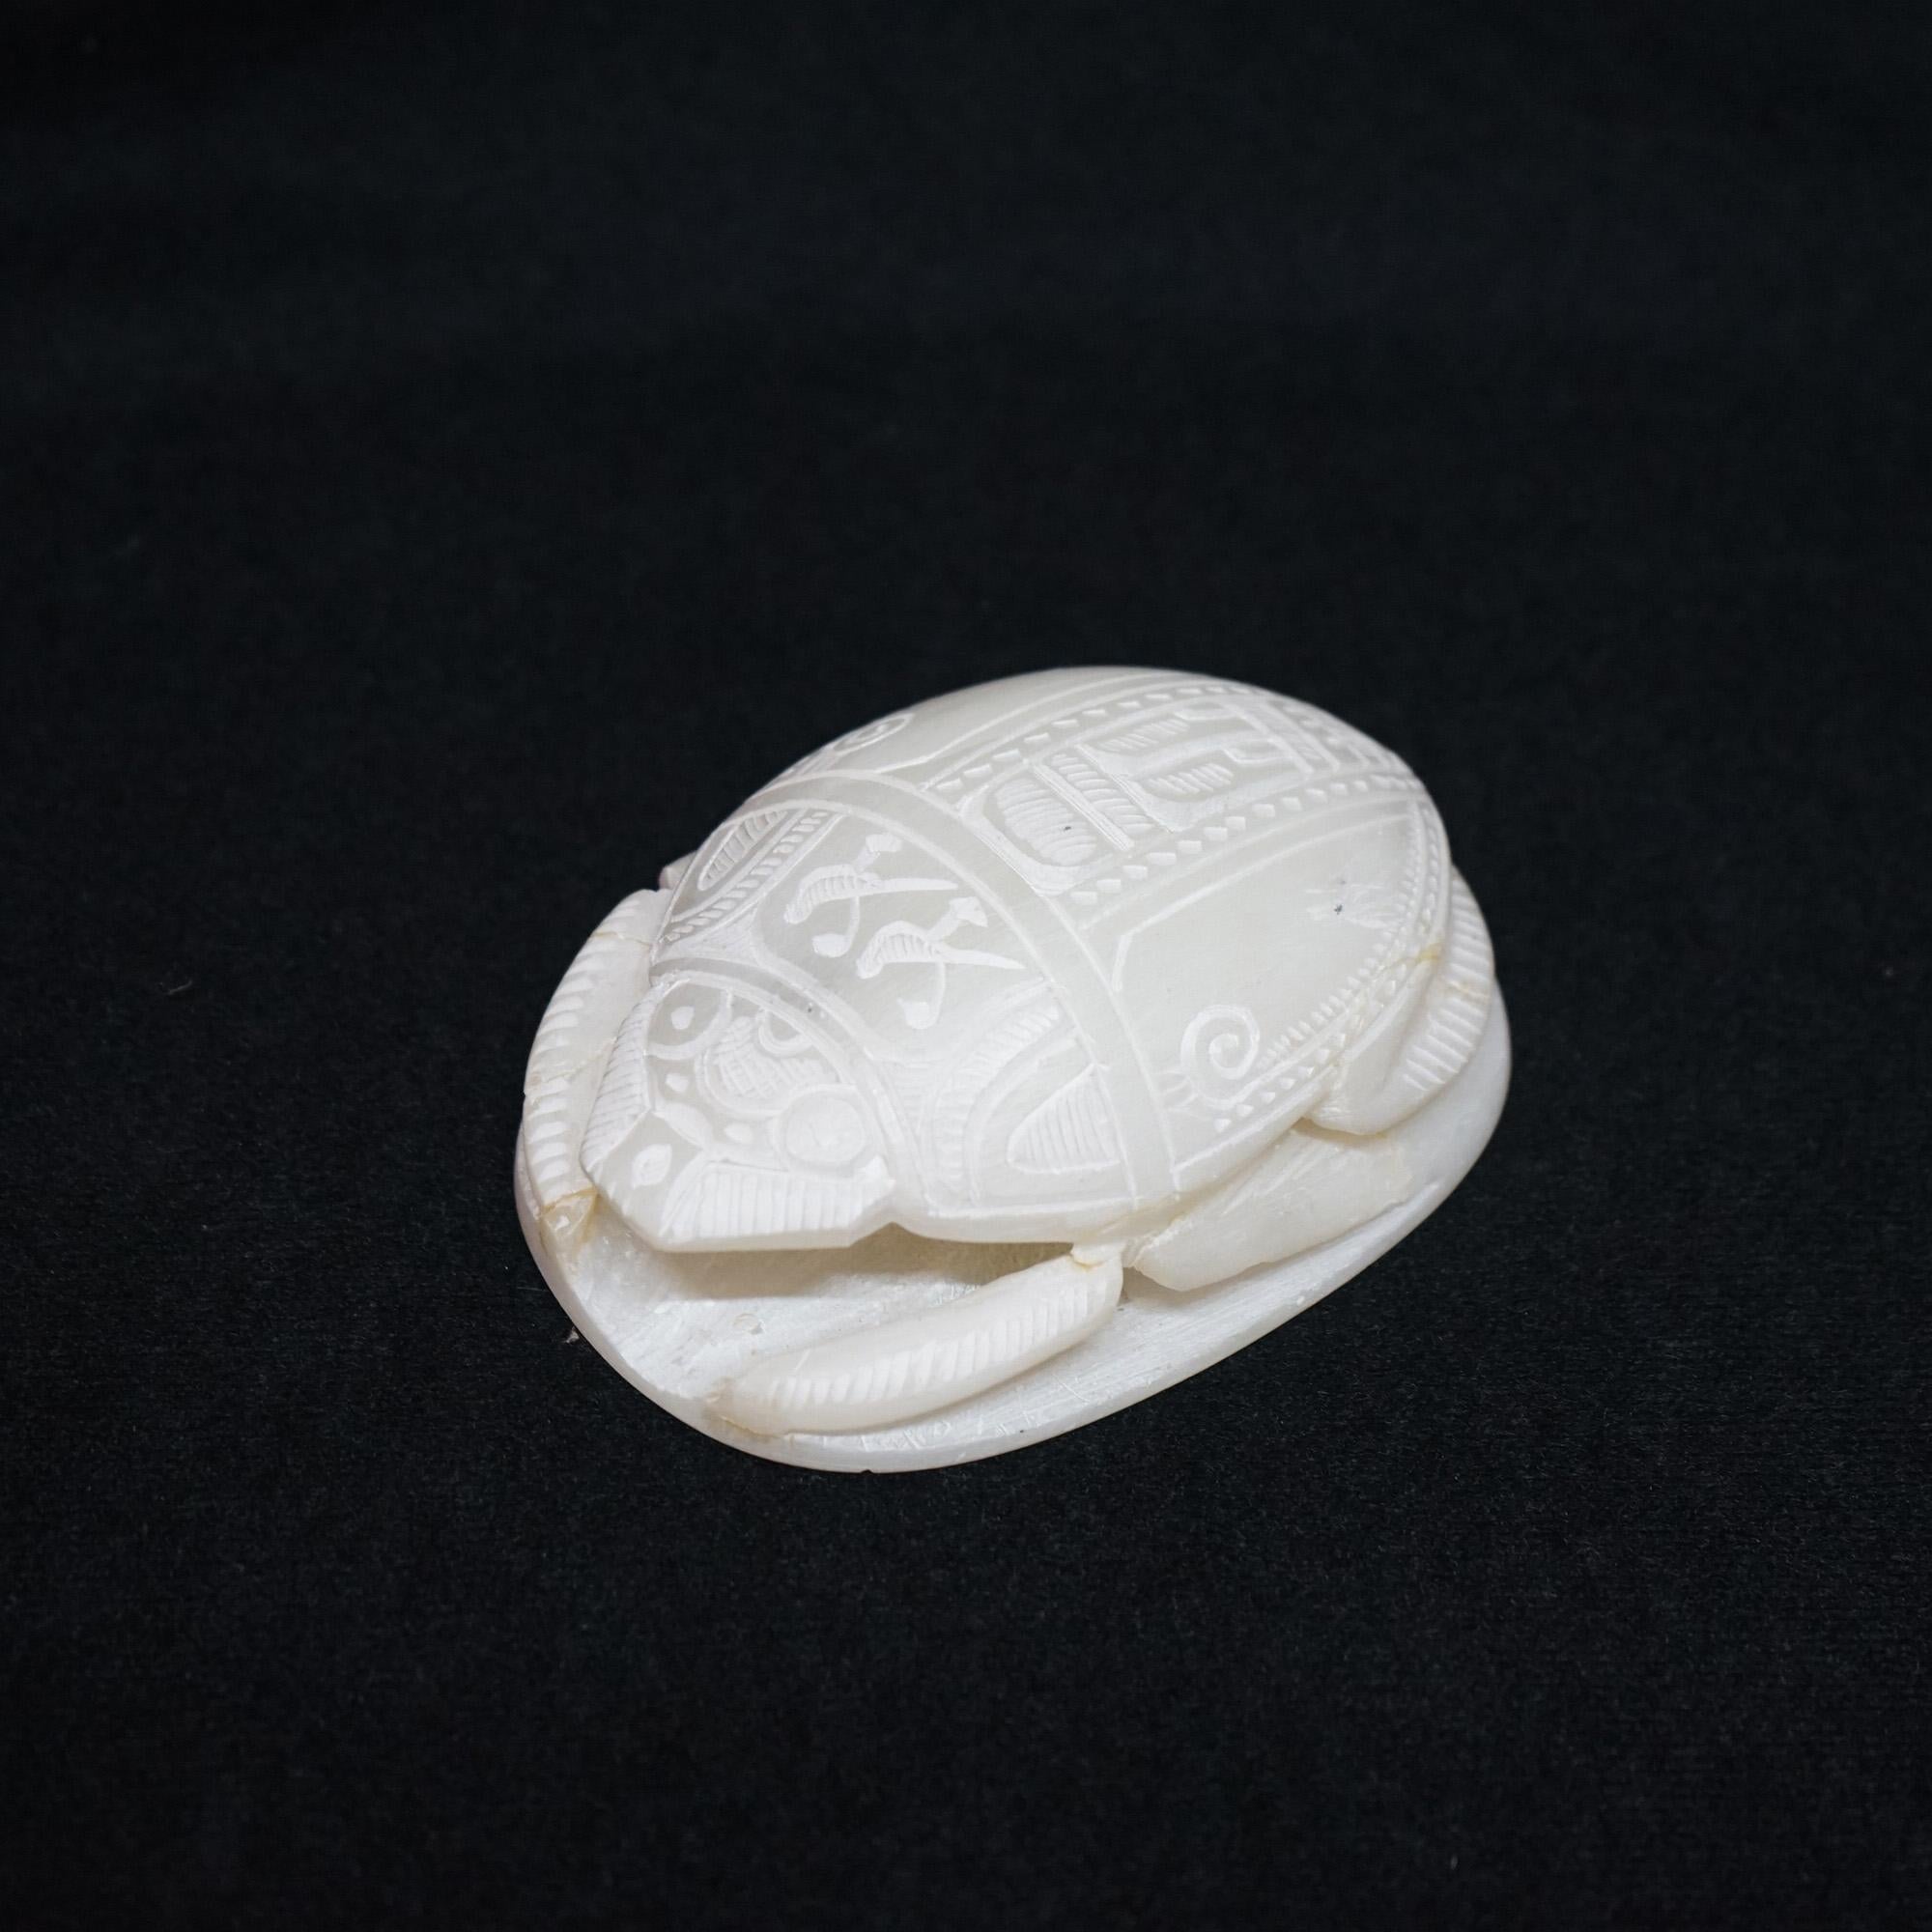 Vintage Egyptian Revival Carved Alabaster Scarab Figure Paperweight 20th C 1